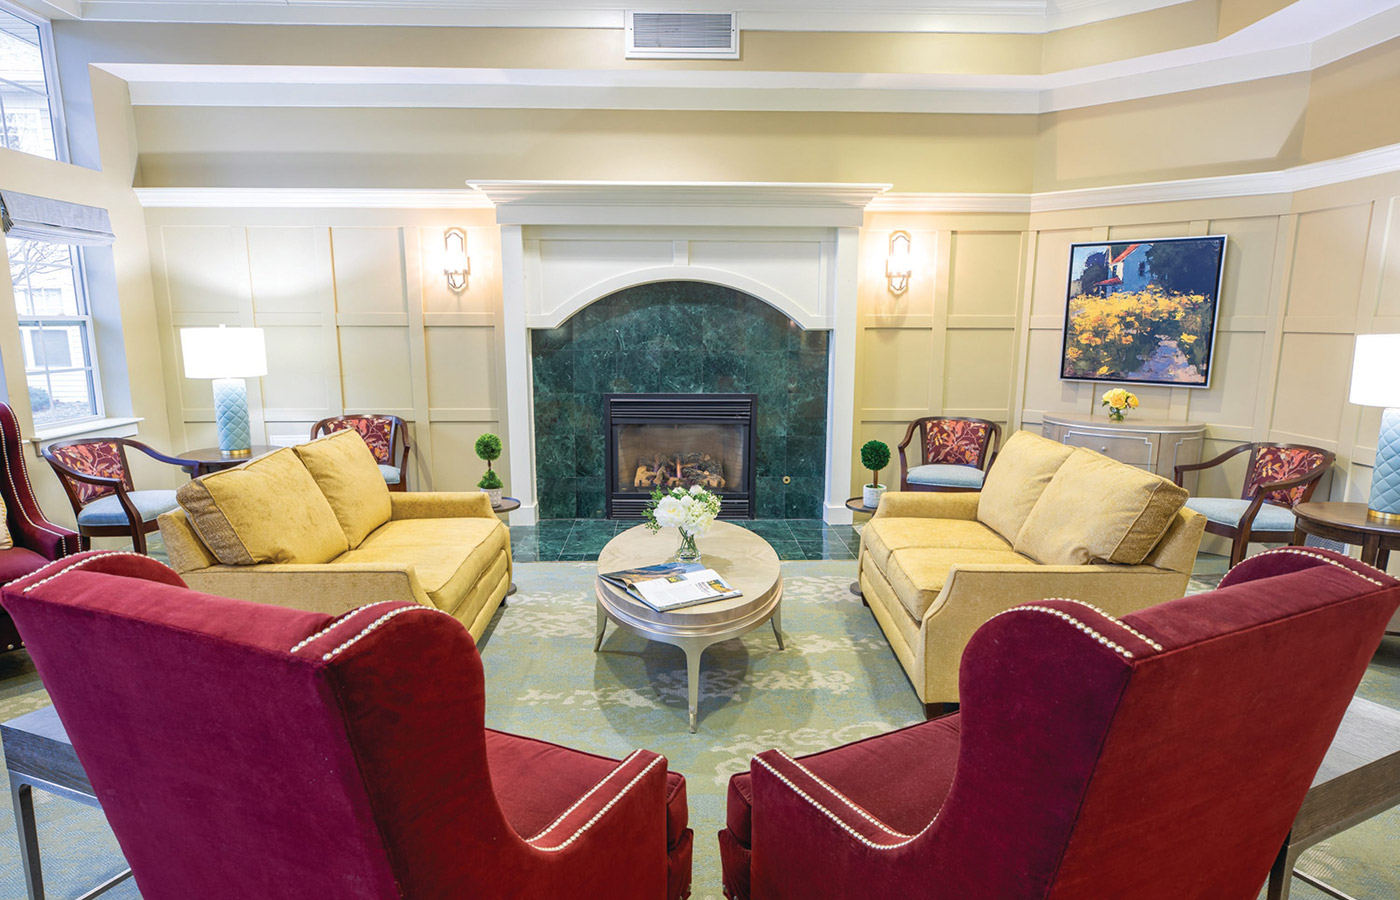 A seating area in front of a fire place at The Legacy at Park Crescent.